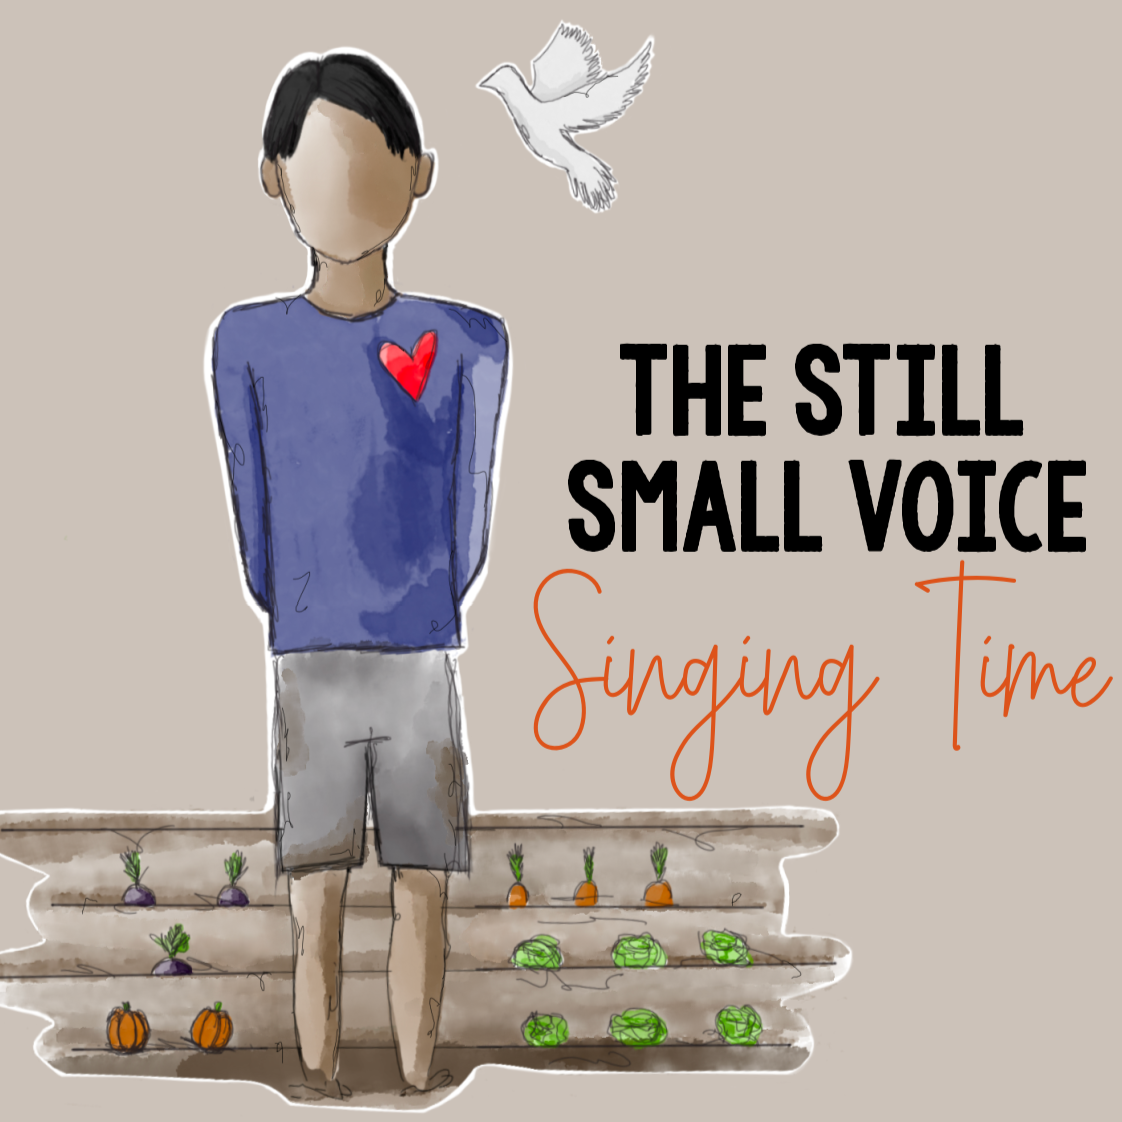 Teach The Still Small Voice with these fun and engaging Singing Time Ideas for LDS Primary Music Leaders - a fun assortment of activities and lesson plans.